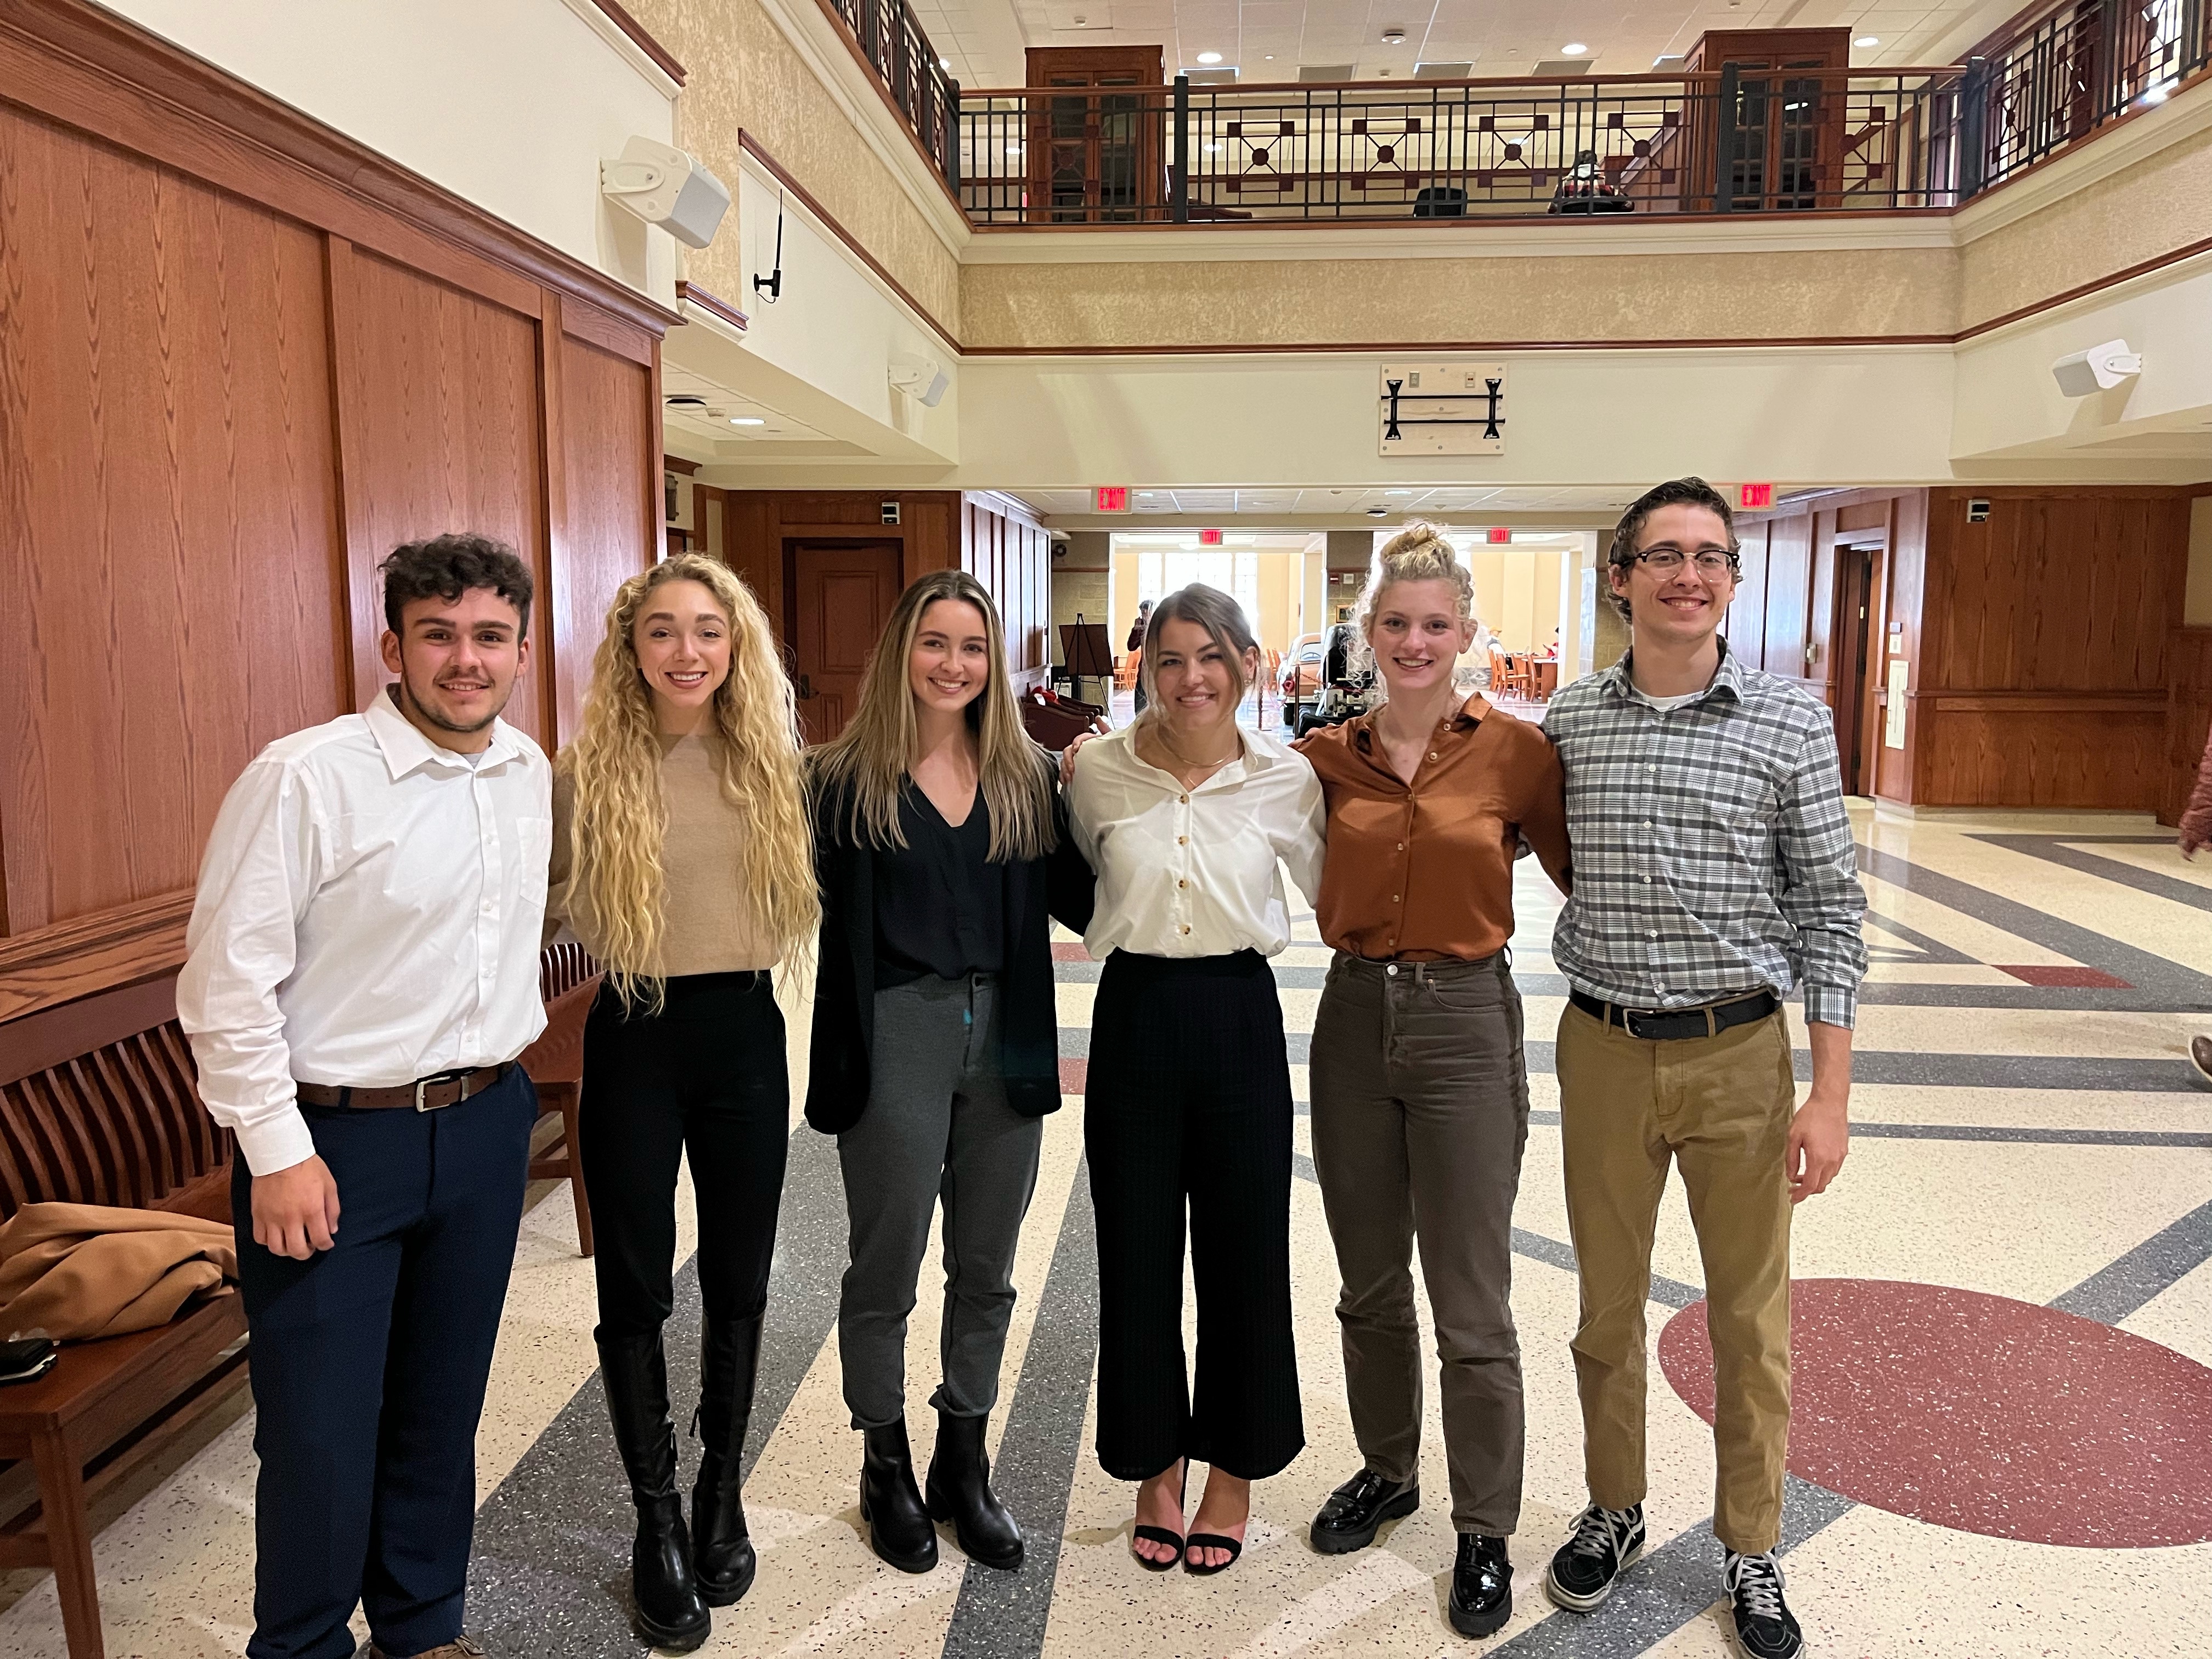 The team after preliminary deliverable presentations, left-to-right: Cameron Owens, Grace Kreissler, Margo Amatuzio, Ava Lanczy, Isabella Crane, and Jimmy Barlow